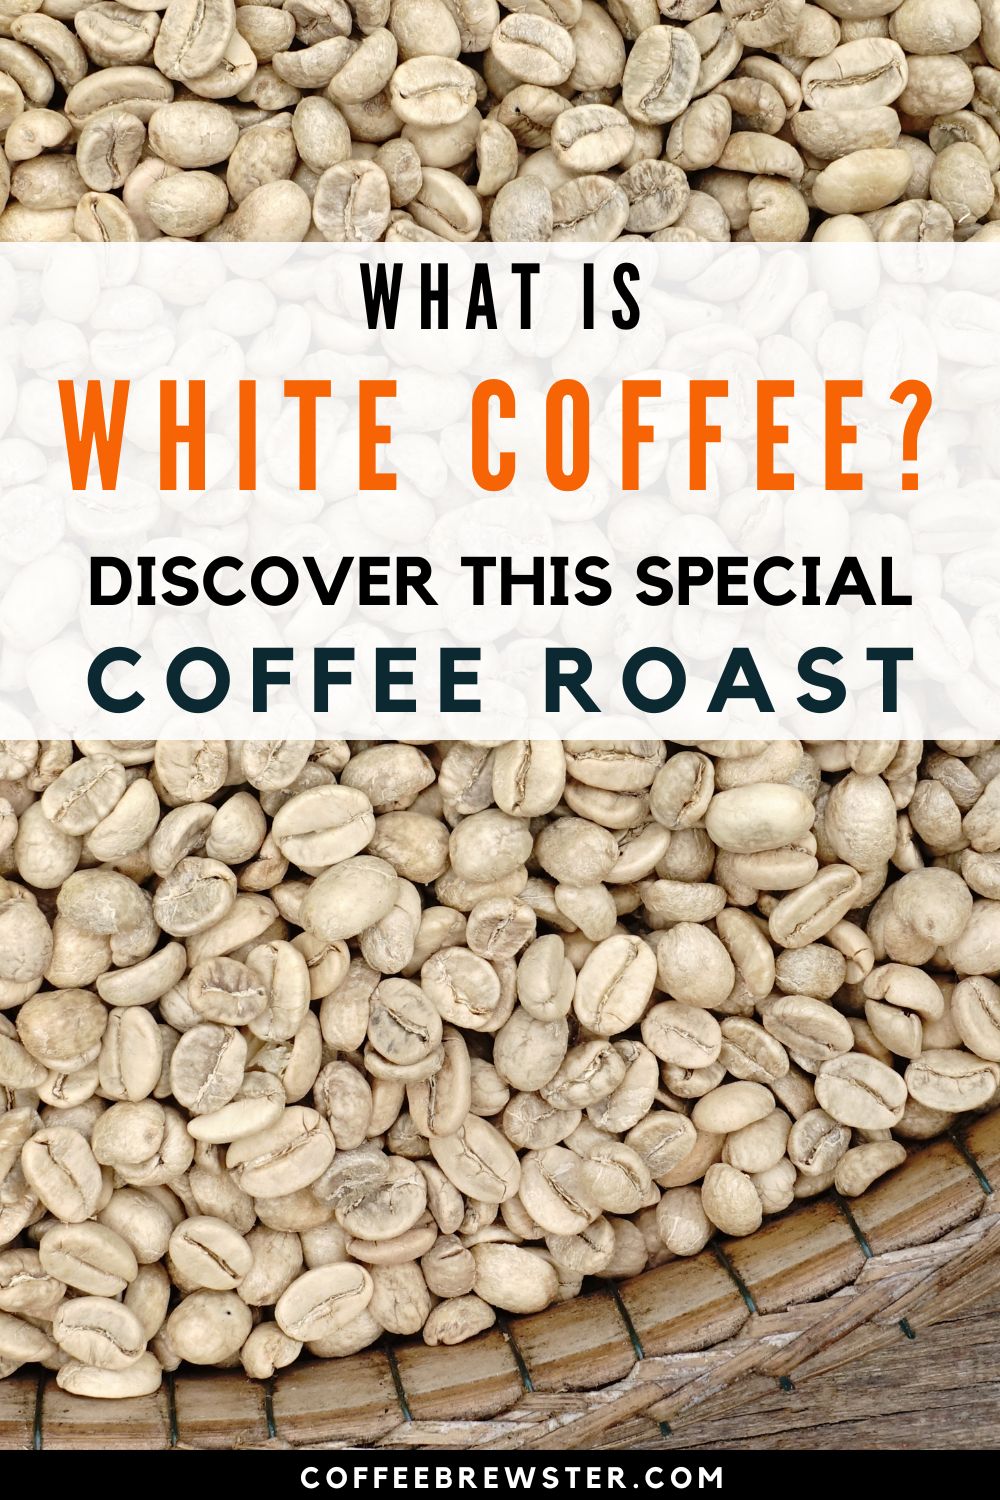 Close-up of white coffee beans with text overlay: "What is White Coffee? Discover This Special Coffee Roast." The bottom text reads "coffeebrewster.com.